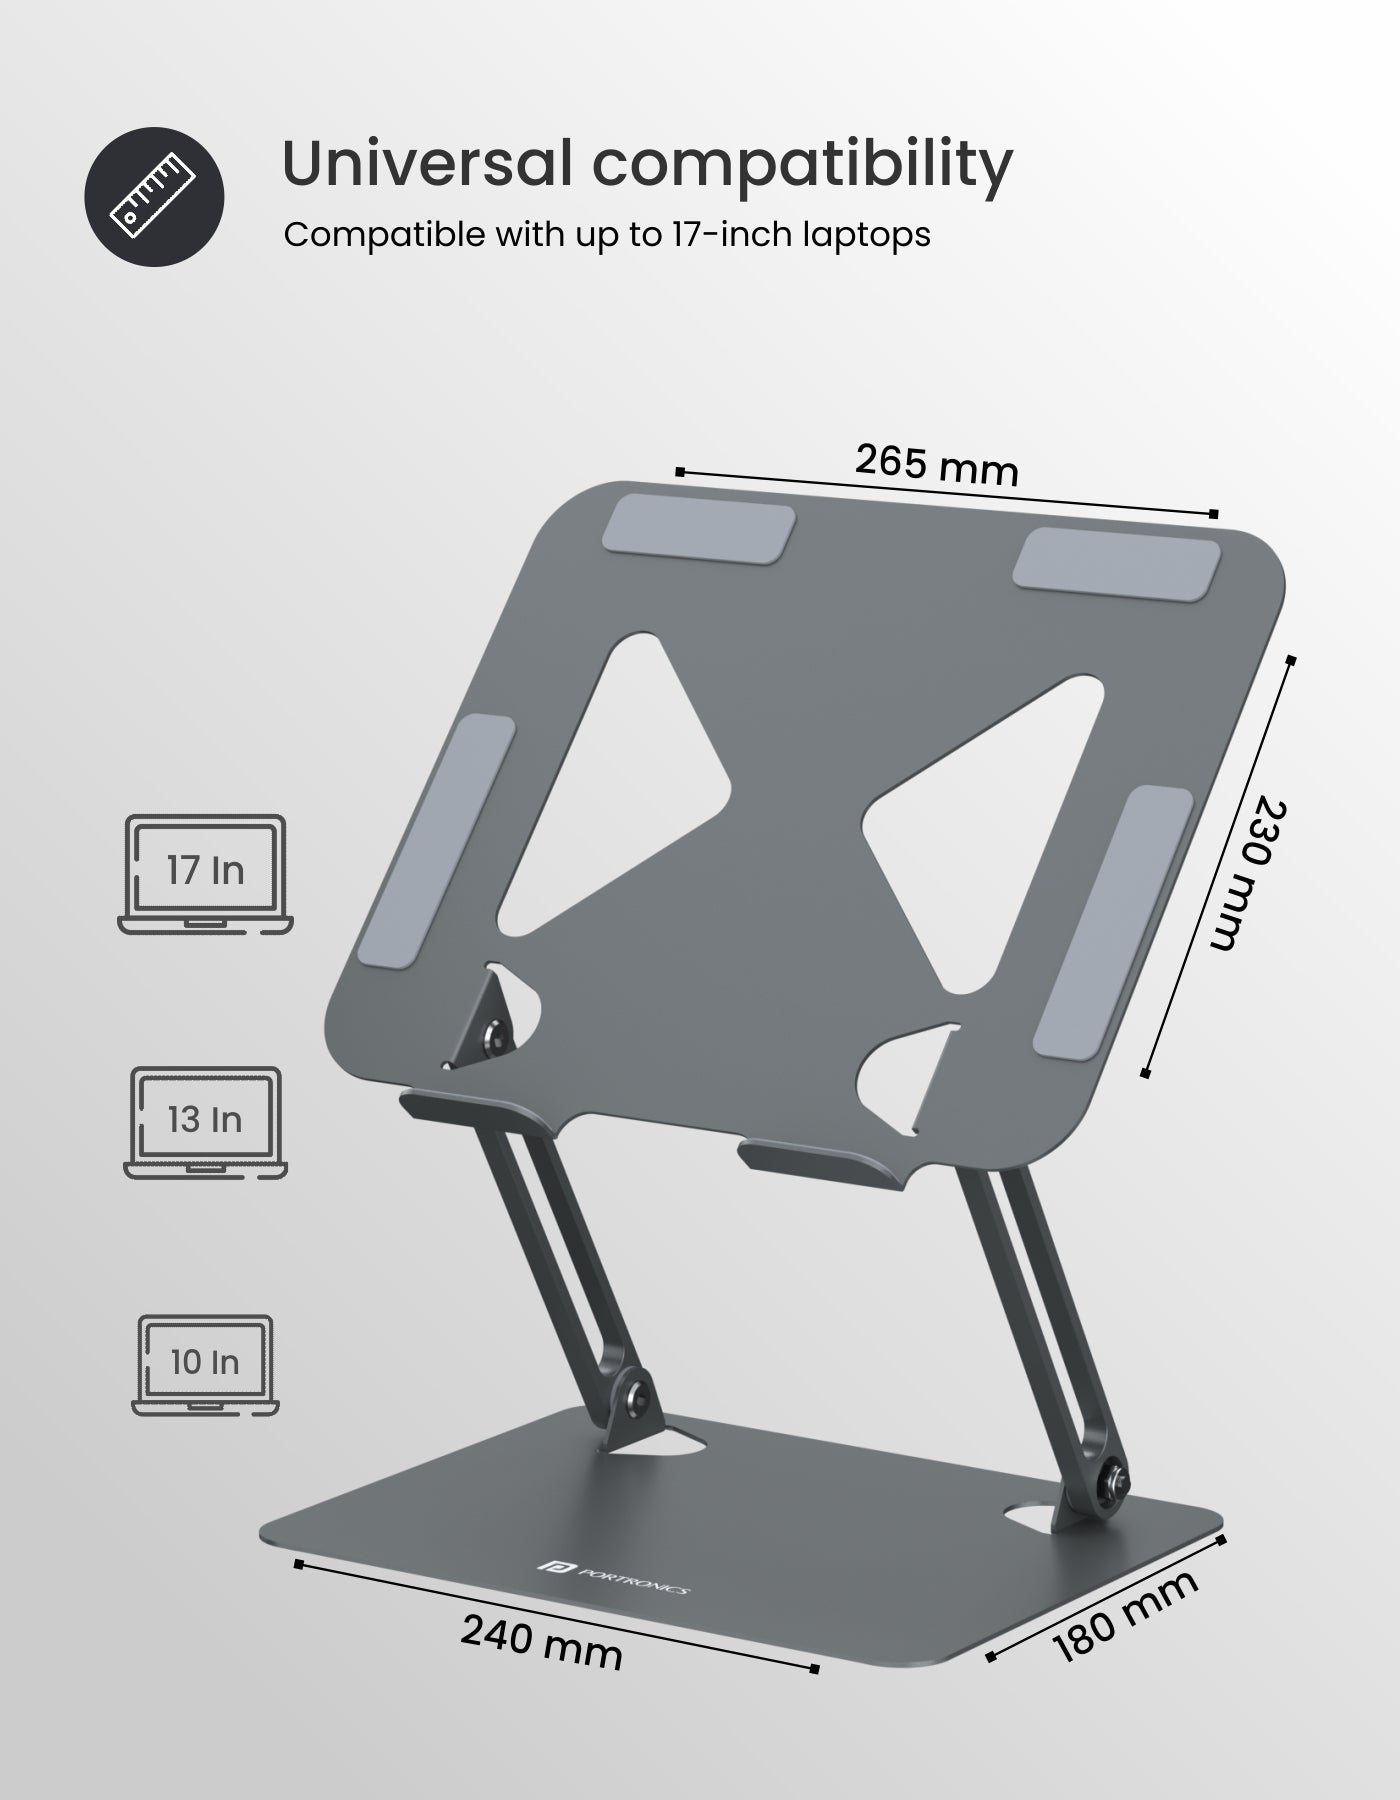 Carbon steel construction gives the laptop stand durability